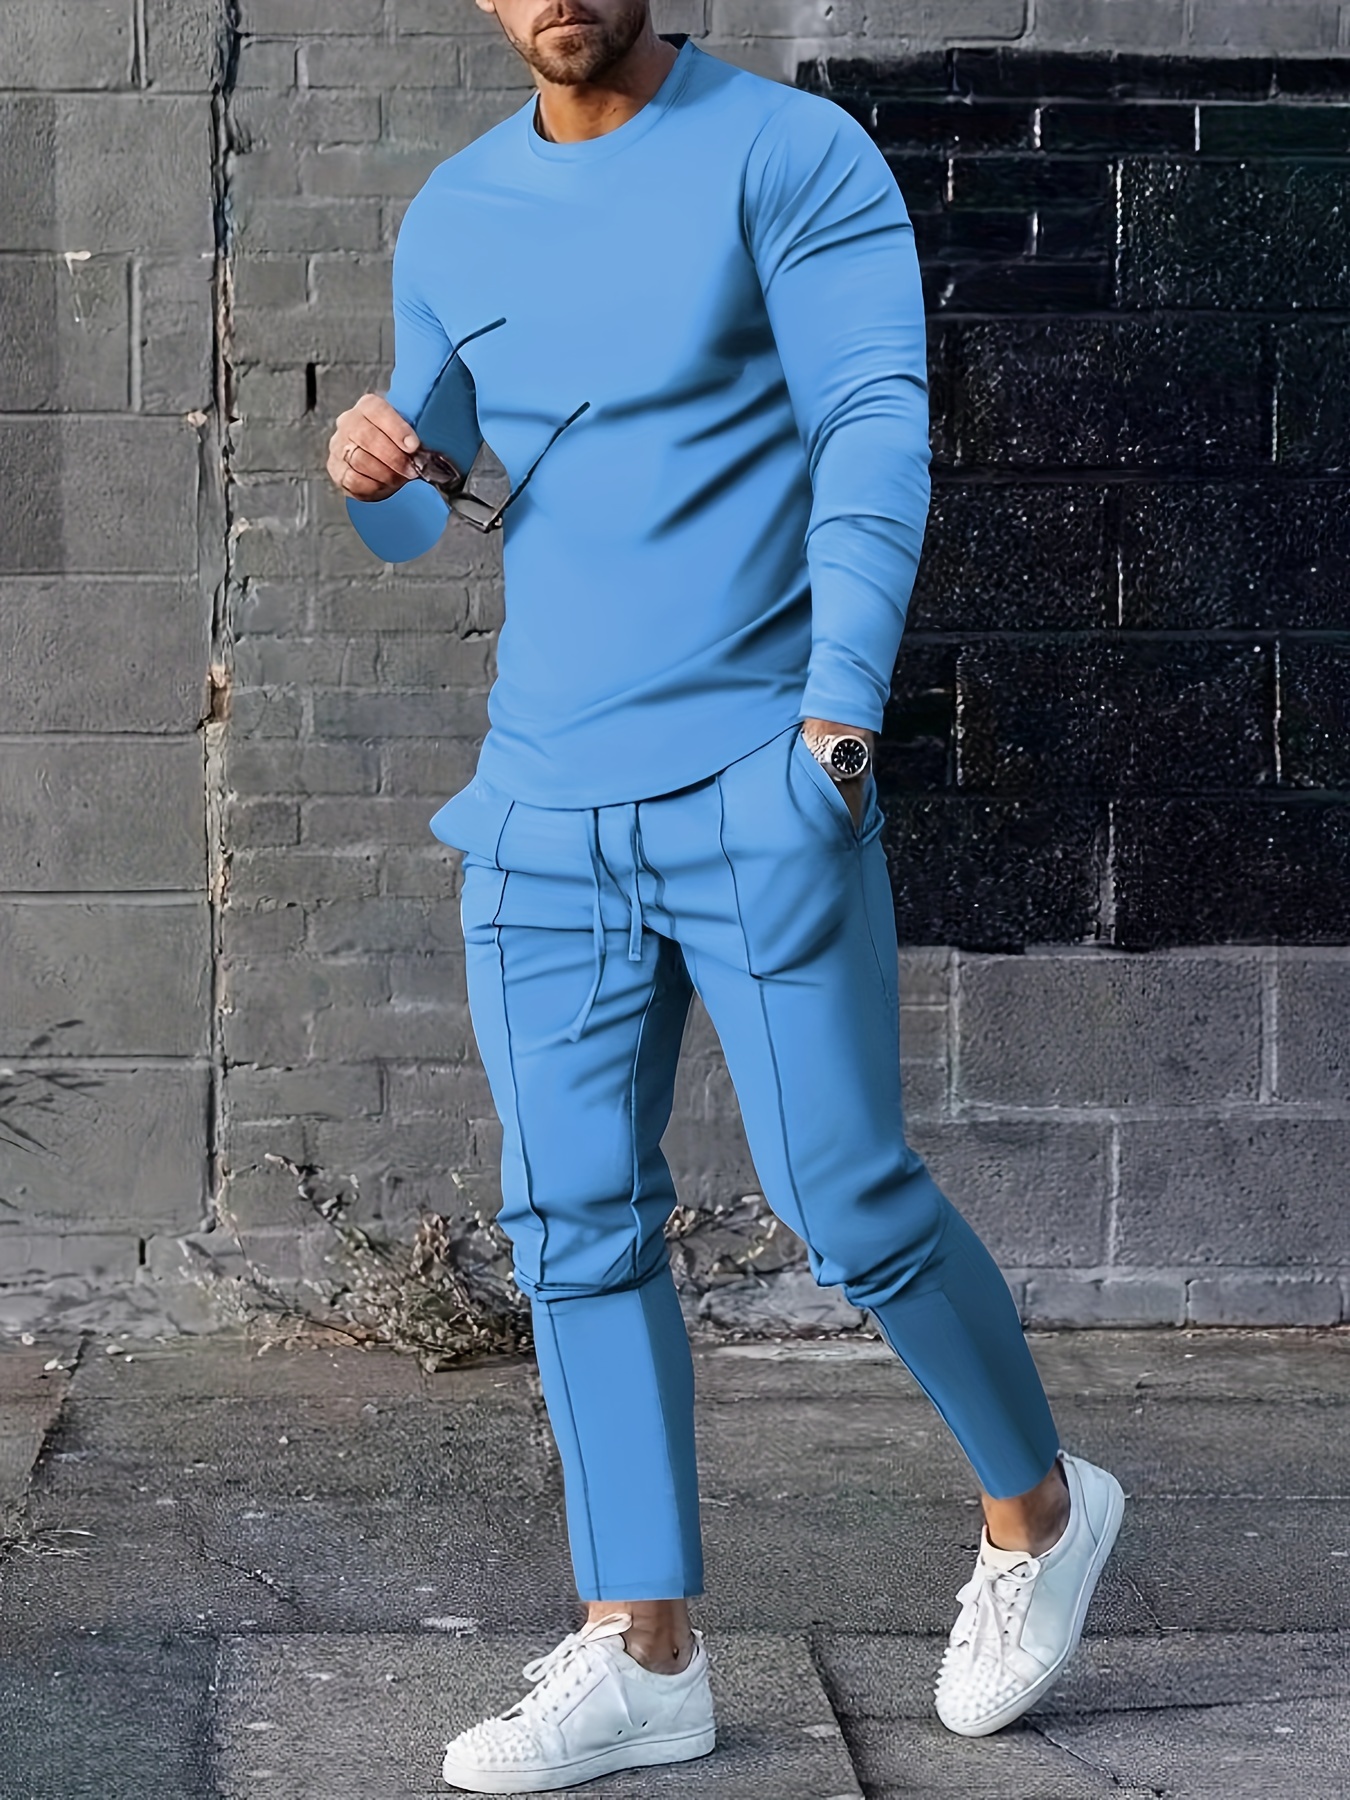 Mens 2 Piece Outfits, Comfy Long Sleeve T-shirt And Casual Drawstring Pants  Set For Autumn, Men's Clothing, Shop Now For Limited-time Deals